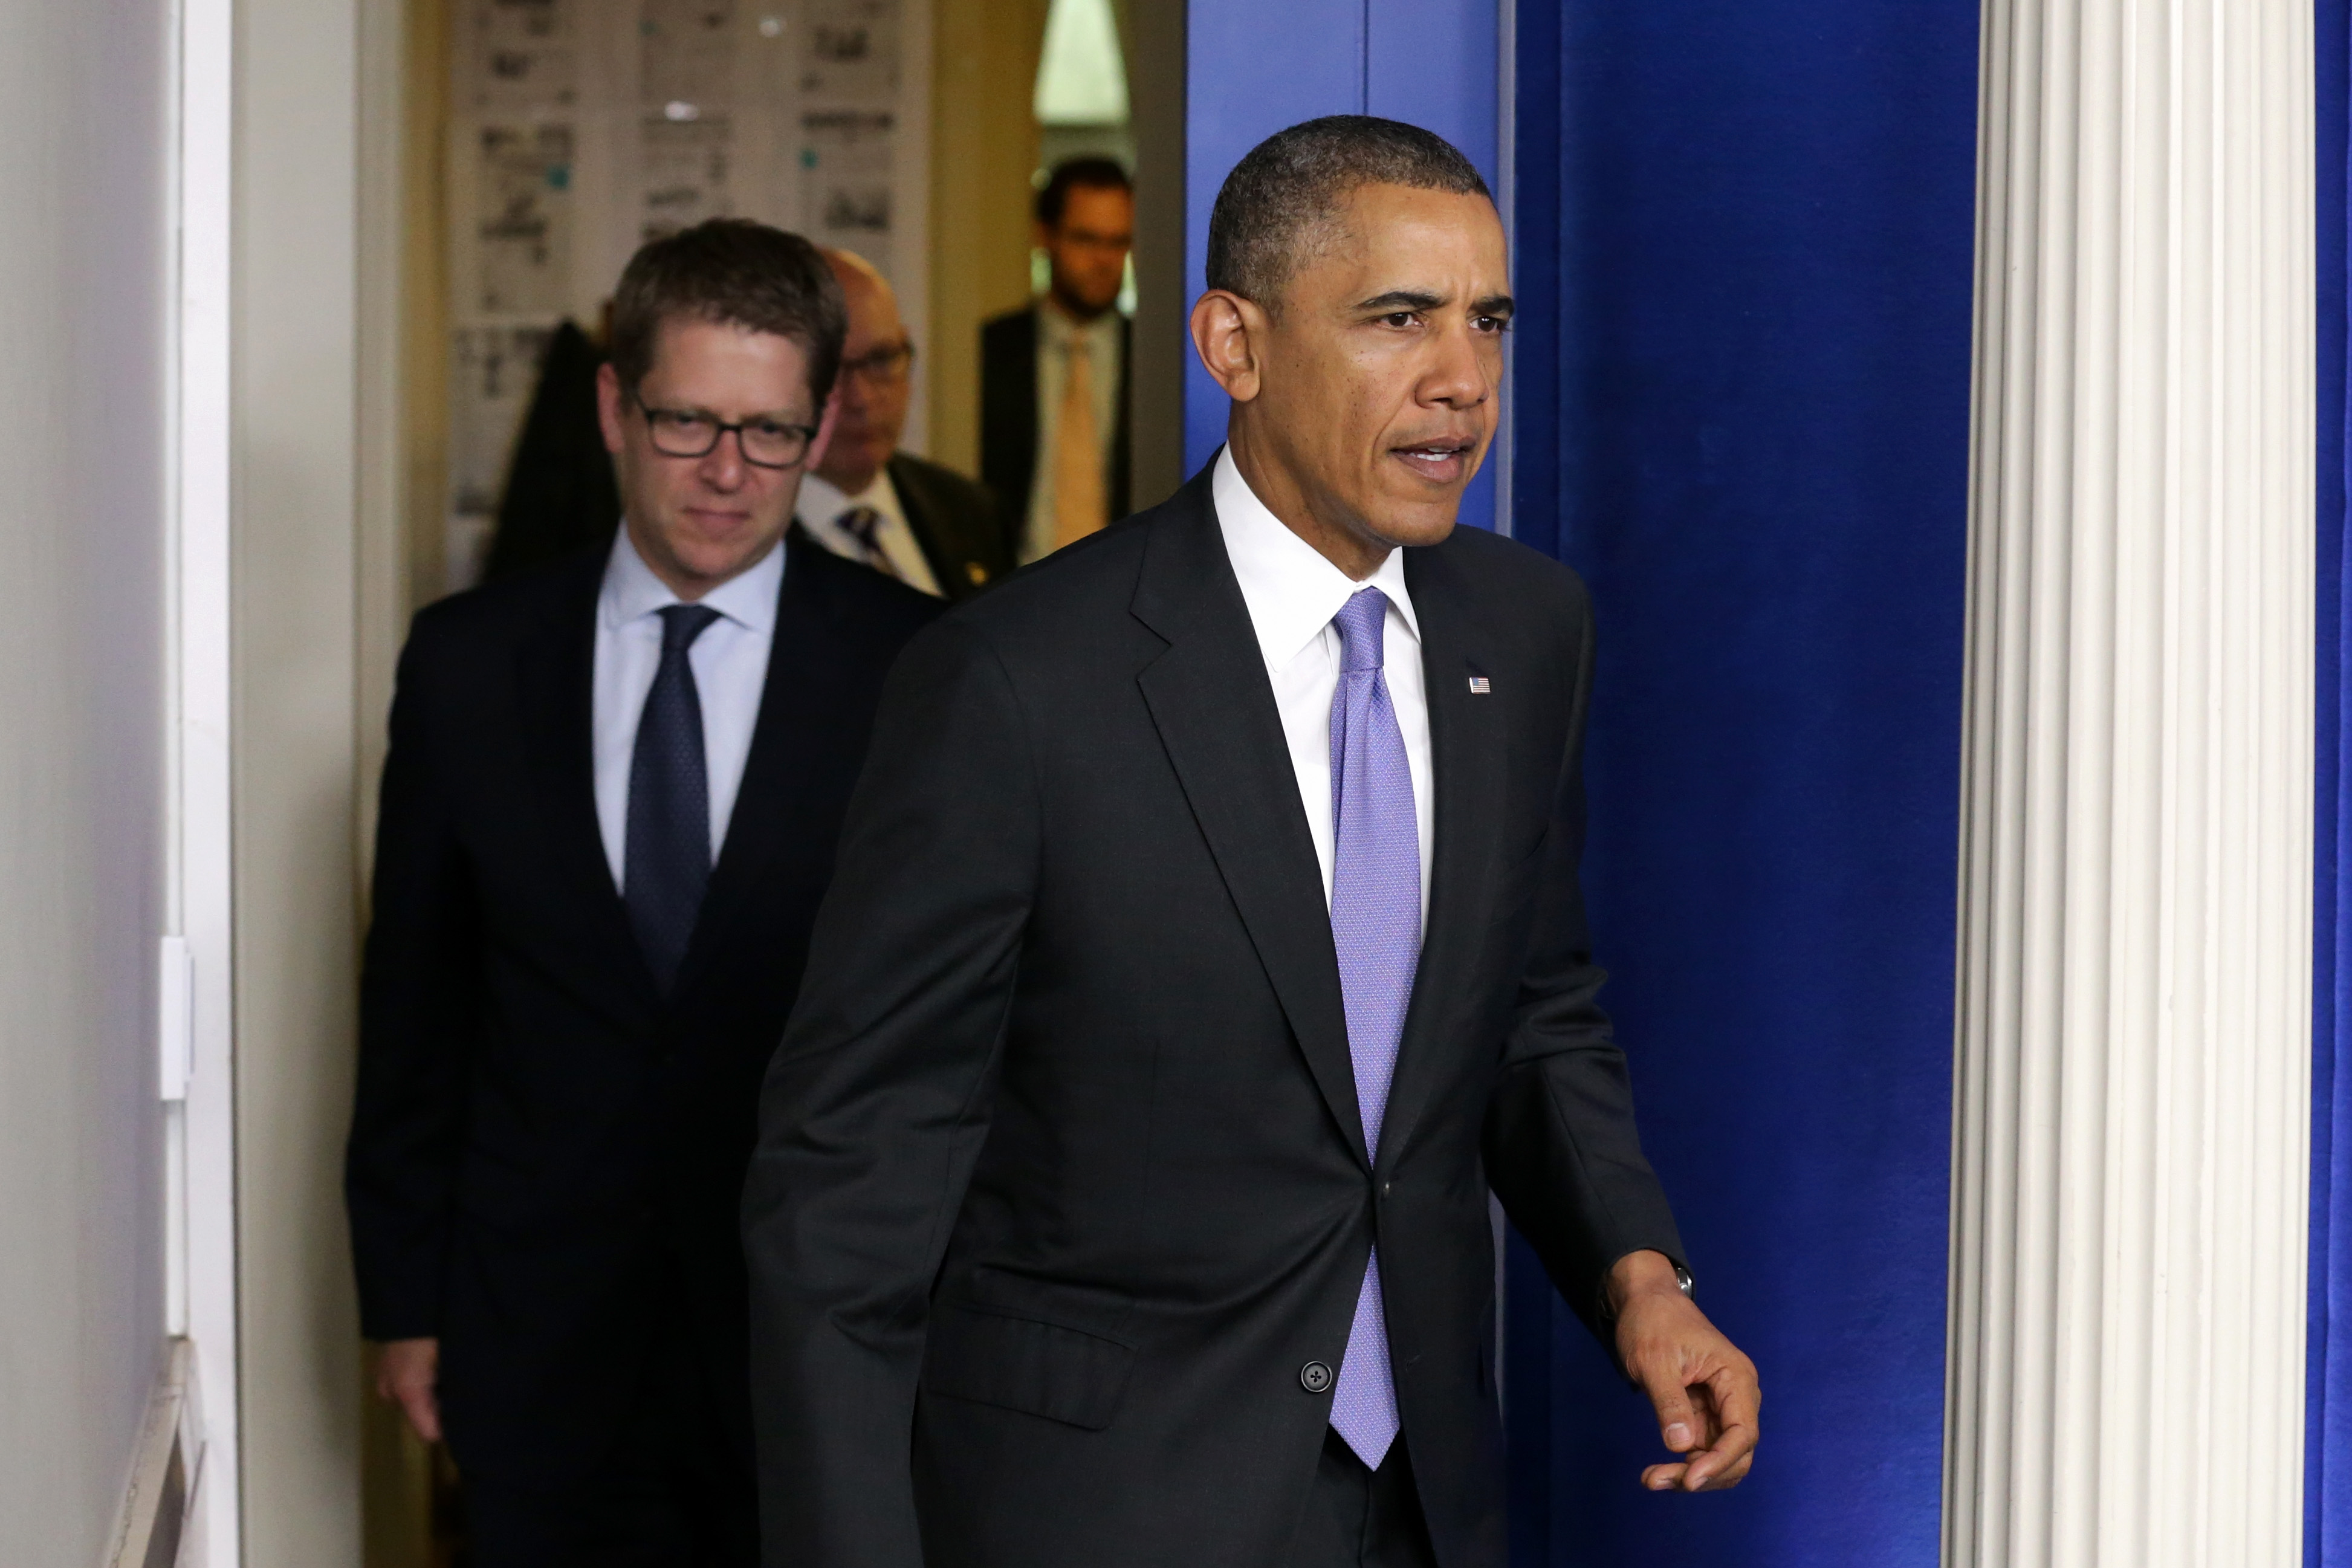 U.S. President Barack Obama (R) arrives to make a statement to the news media about the recent problems at the Veterans Affairs Department with White House Press Secretary Jay Carney in the Brady Press Briefing Room at the White House May 21, 2014 in Washington, DC. (Chip Somodevilla&mdash;Getty Images)